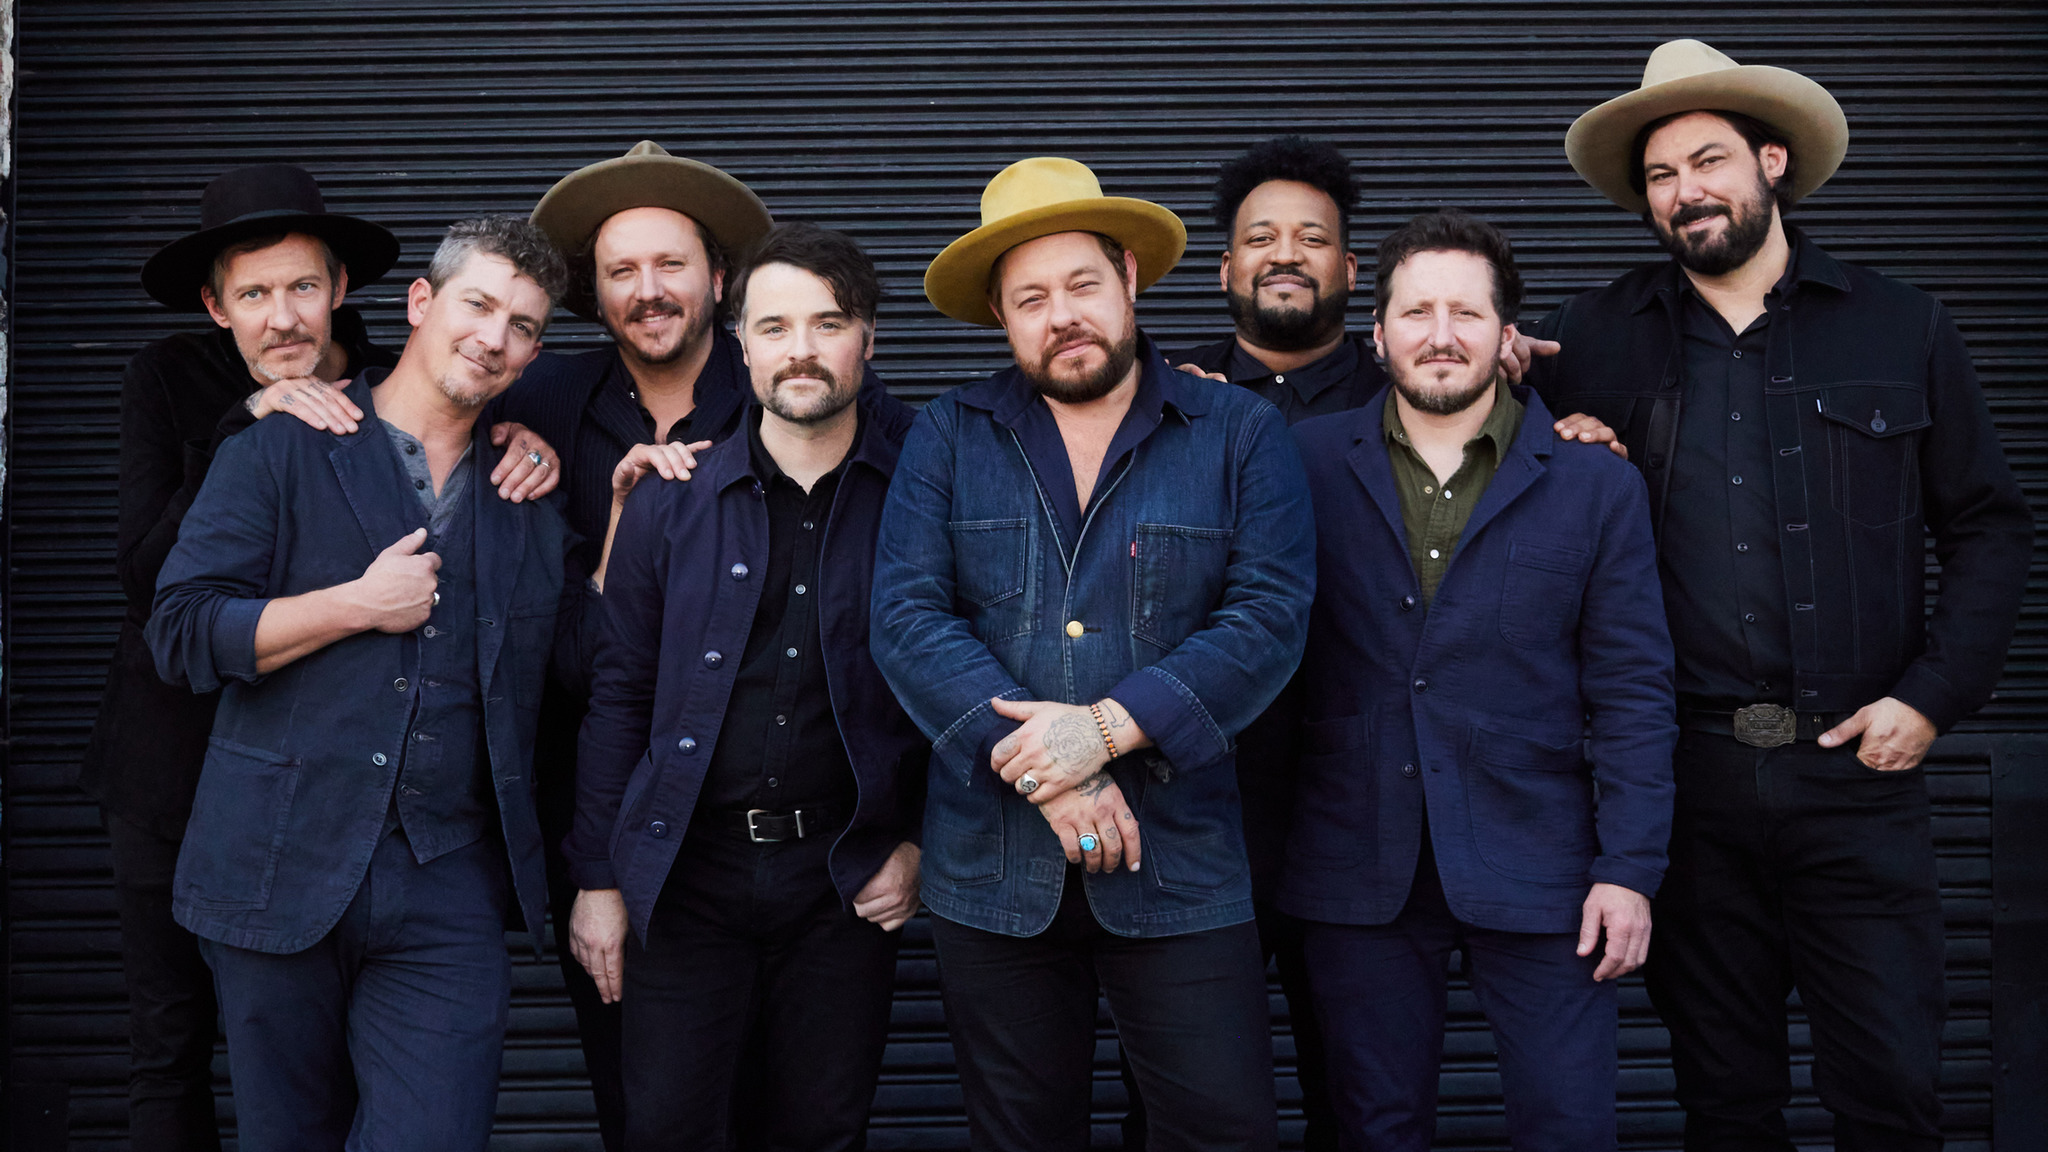 Nathaniel Rateliff & The Night Sweats Tickets, 20222023 Concert Tour